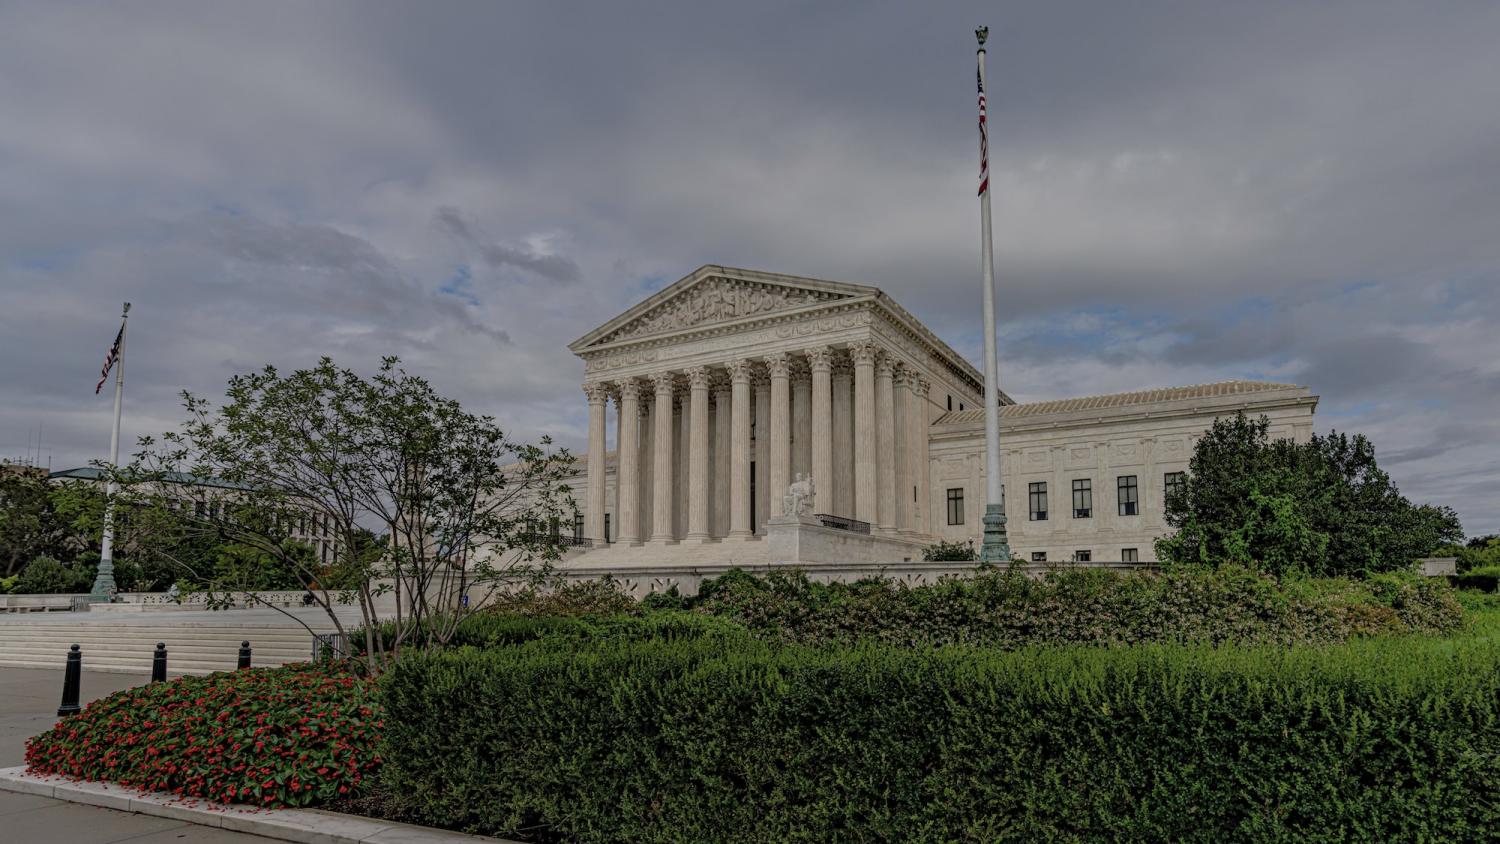 The Supreme Court of the US